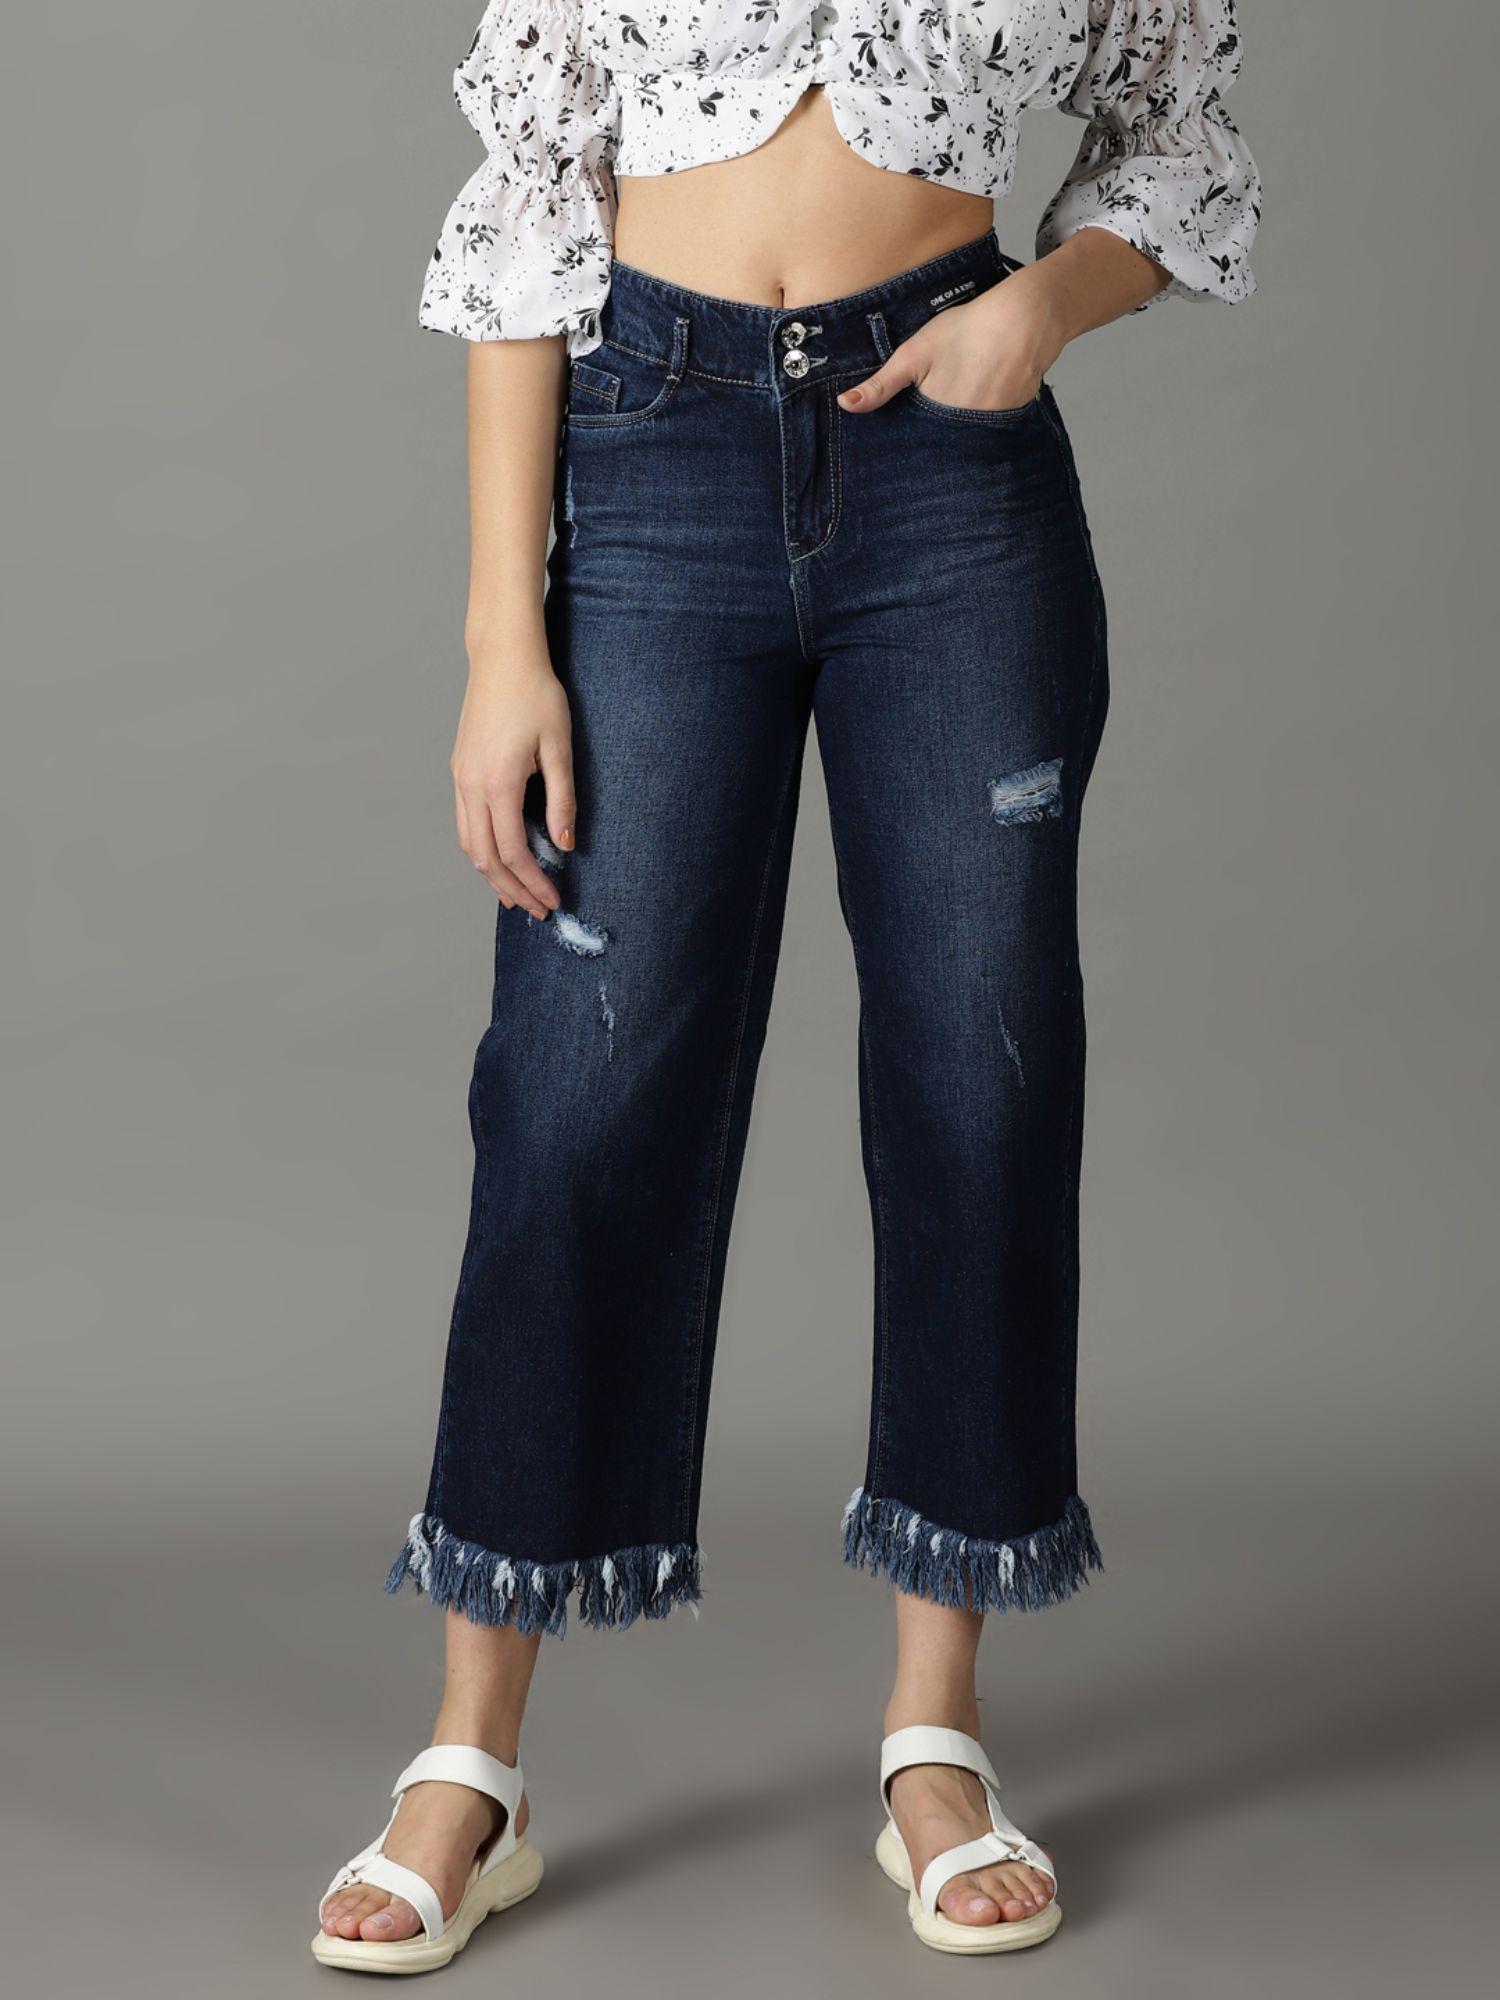 women's non stretchable mildly distressed navy blue wide leg jeans